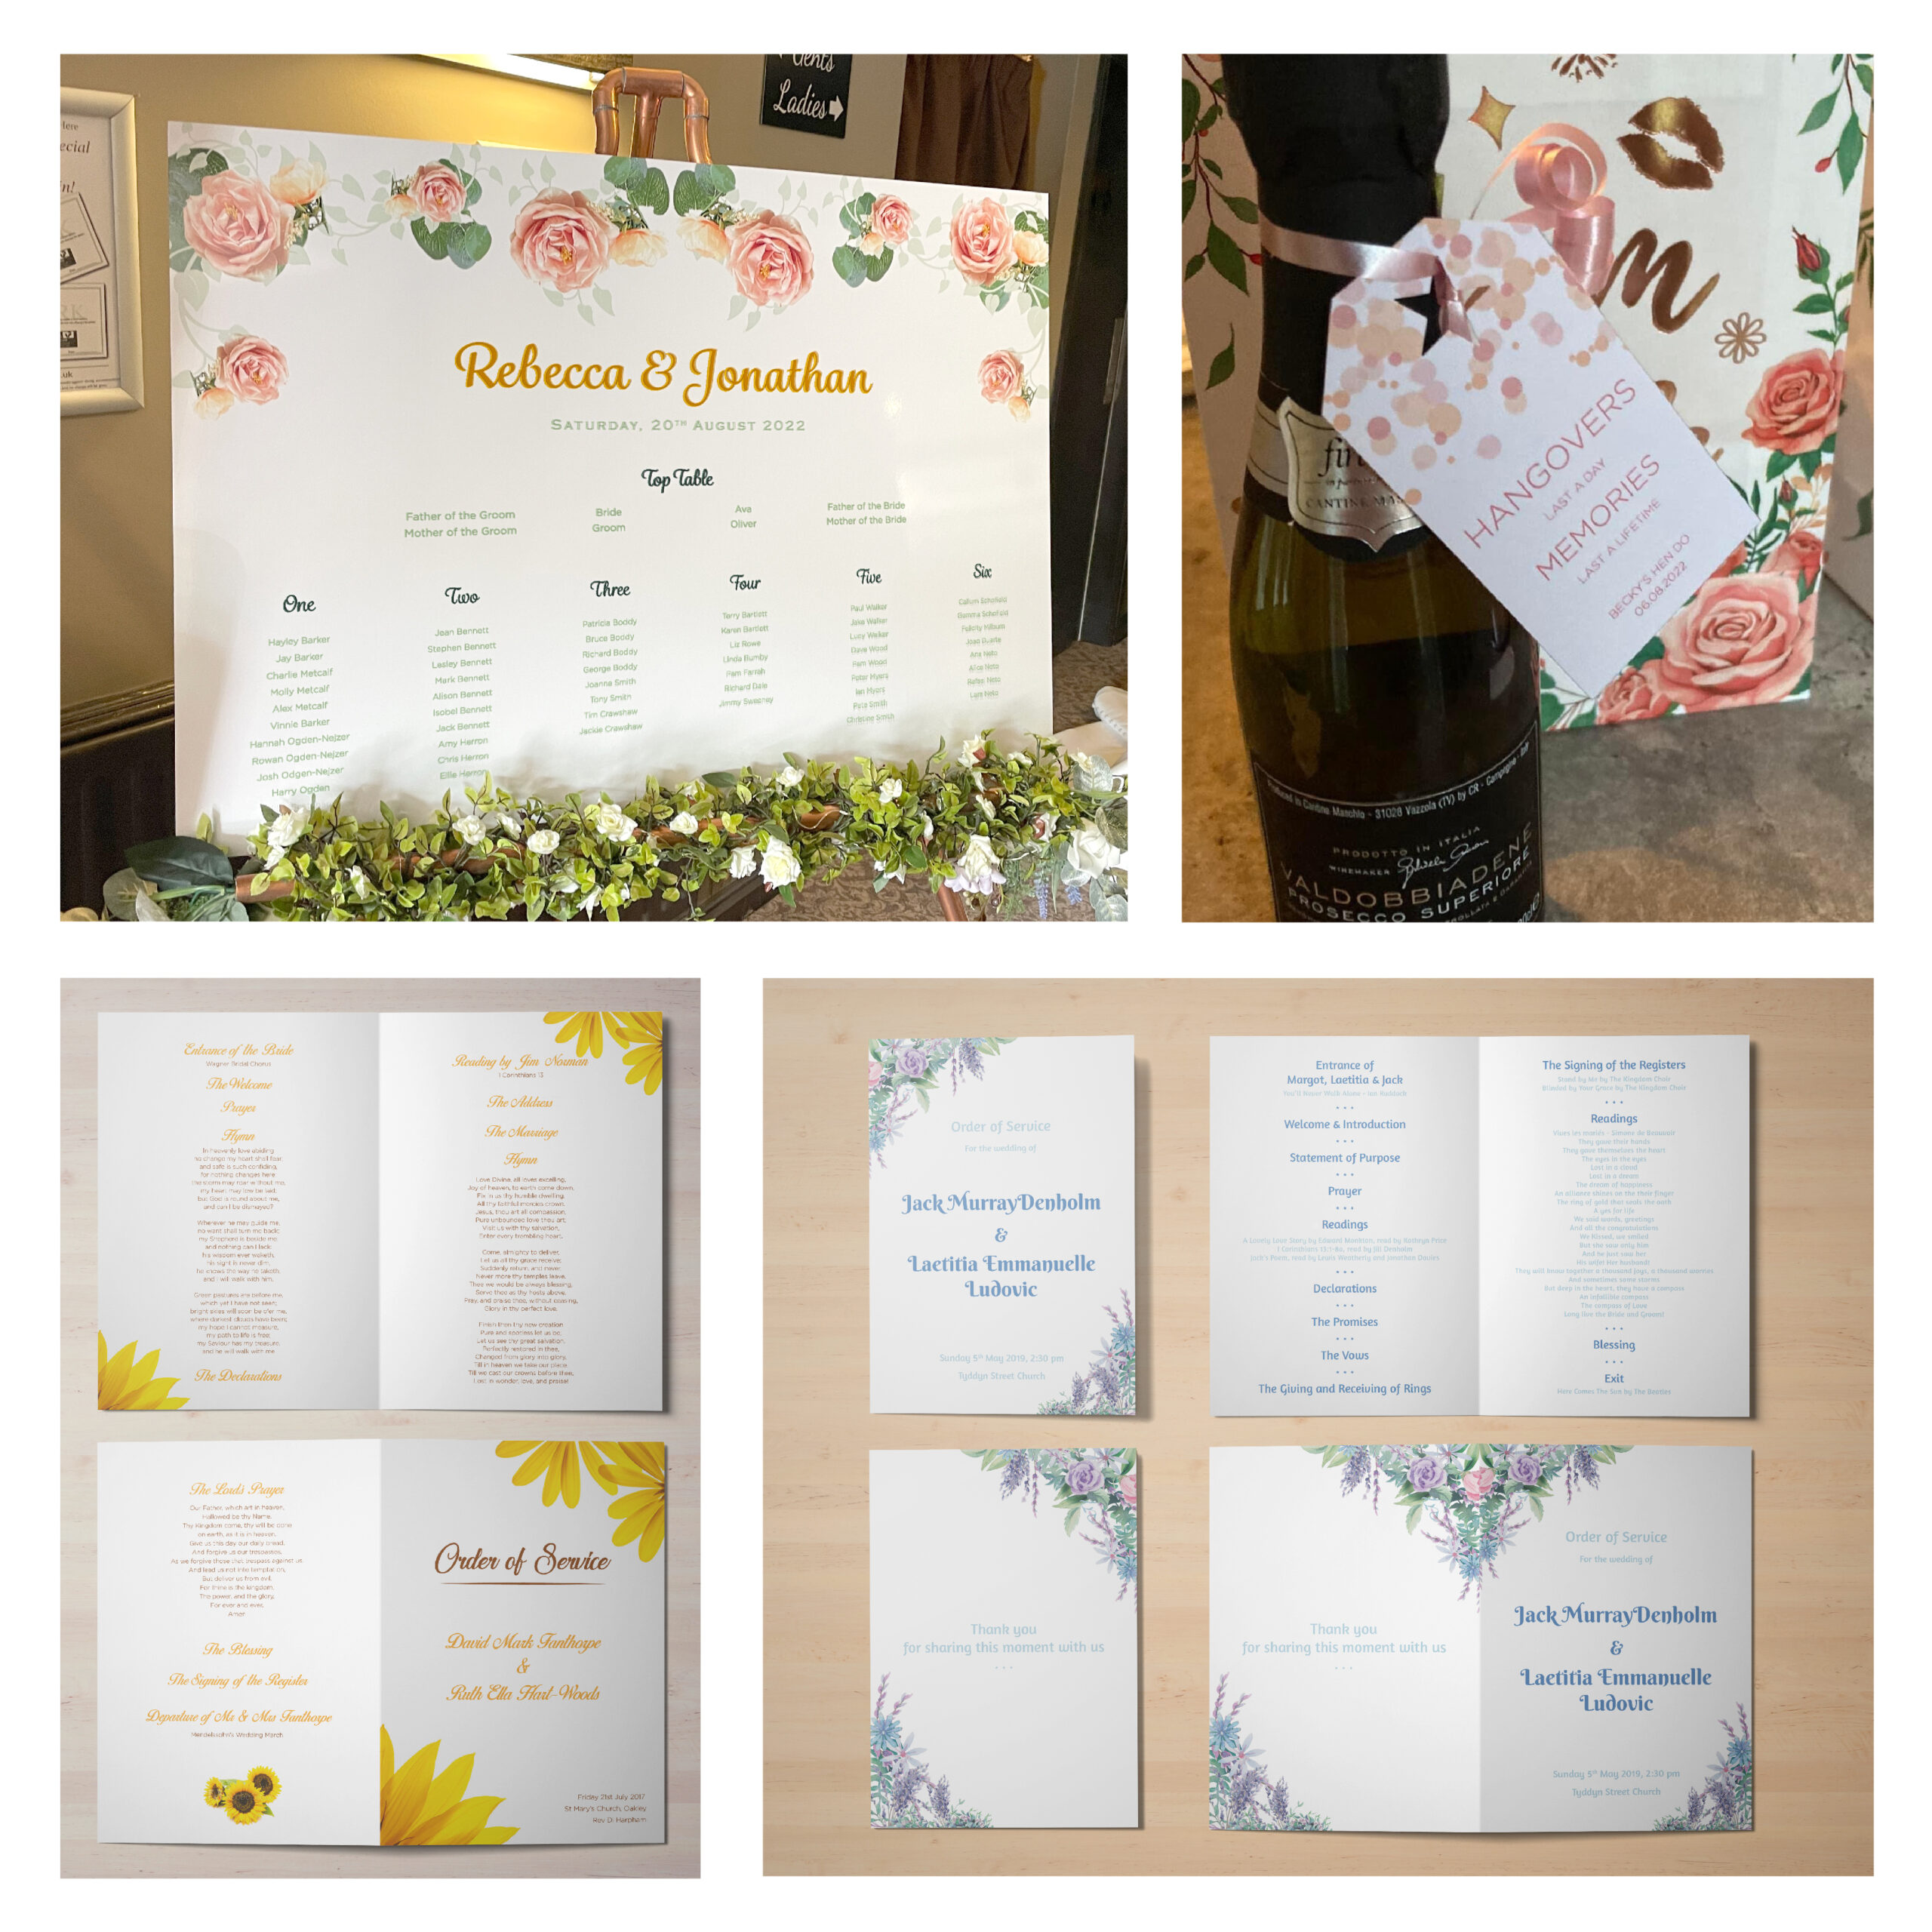 Wedding signs, orders of services and party favours